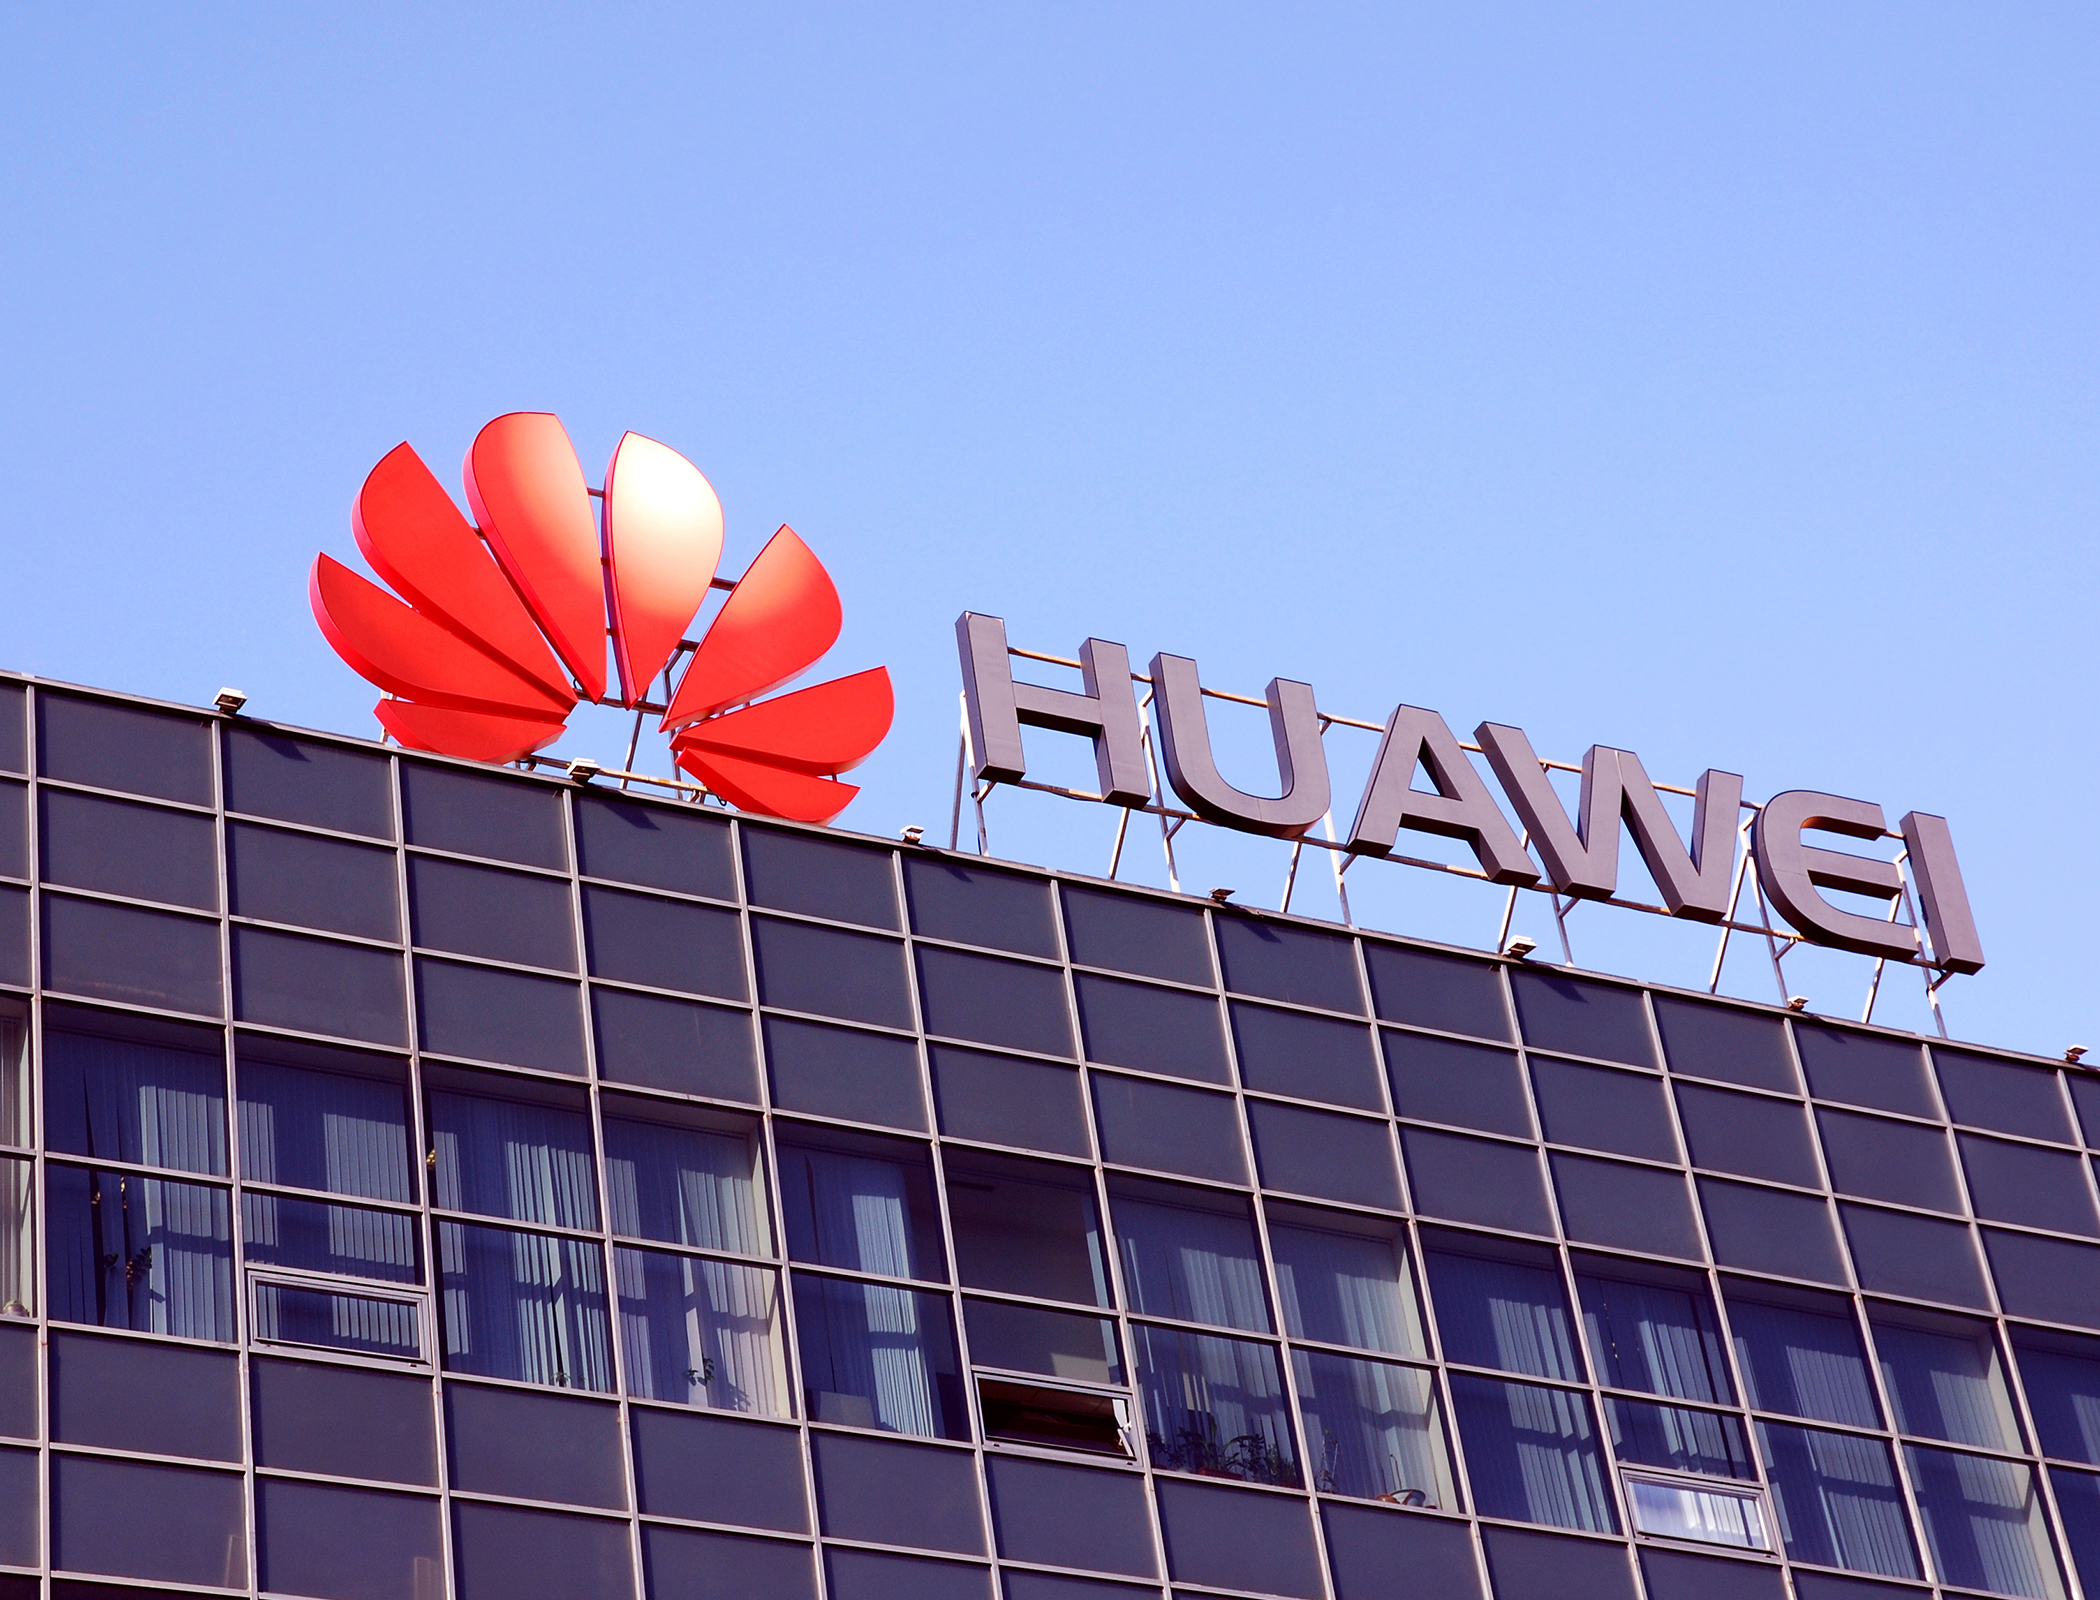 Huawei could be building secret chip plants to bypass US sanctions, trade body warns